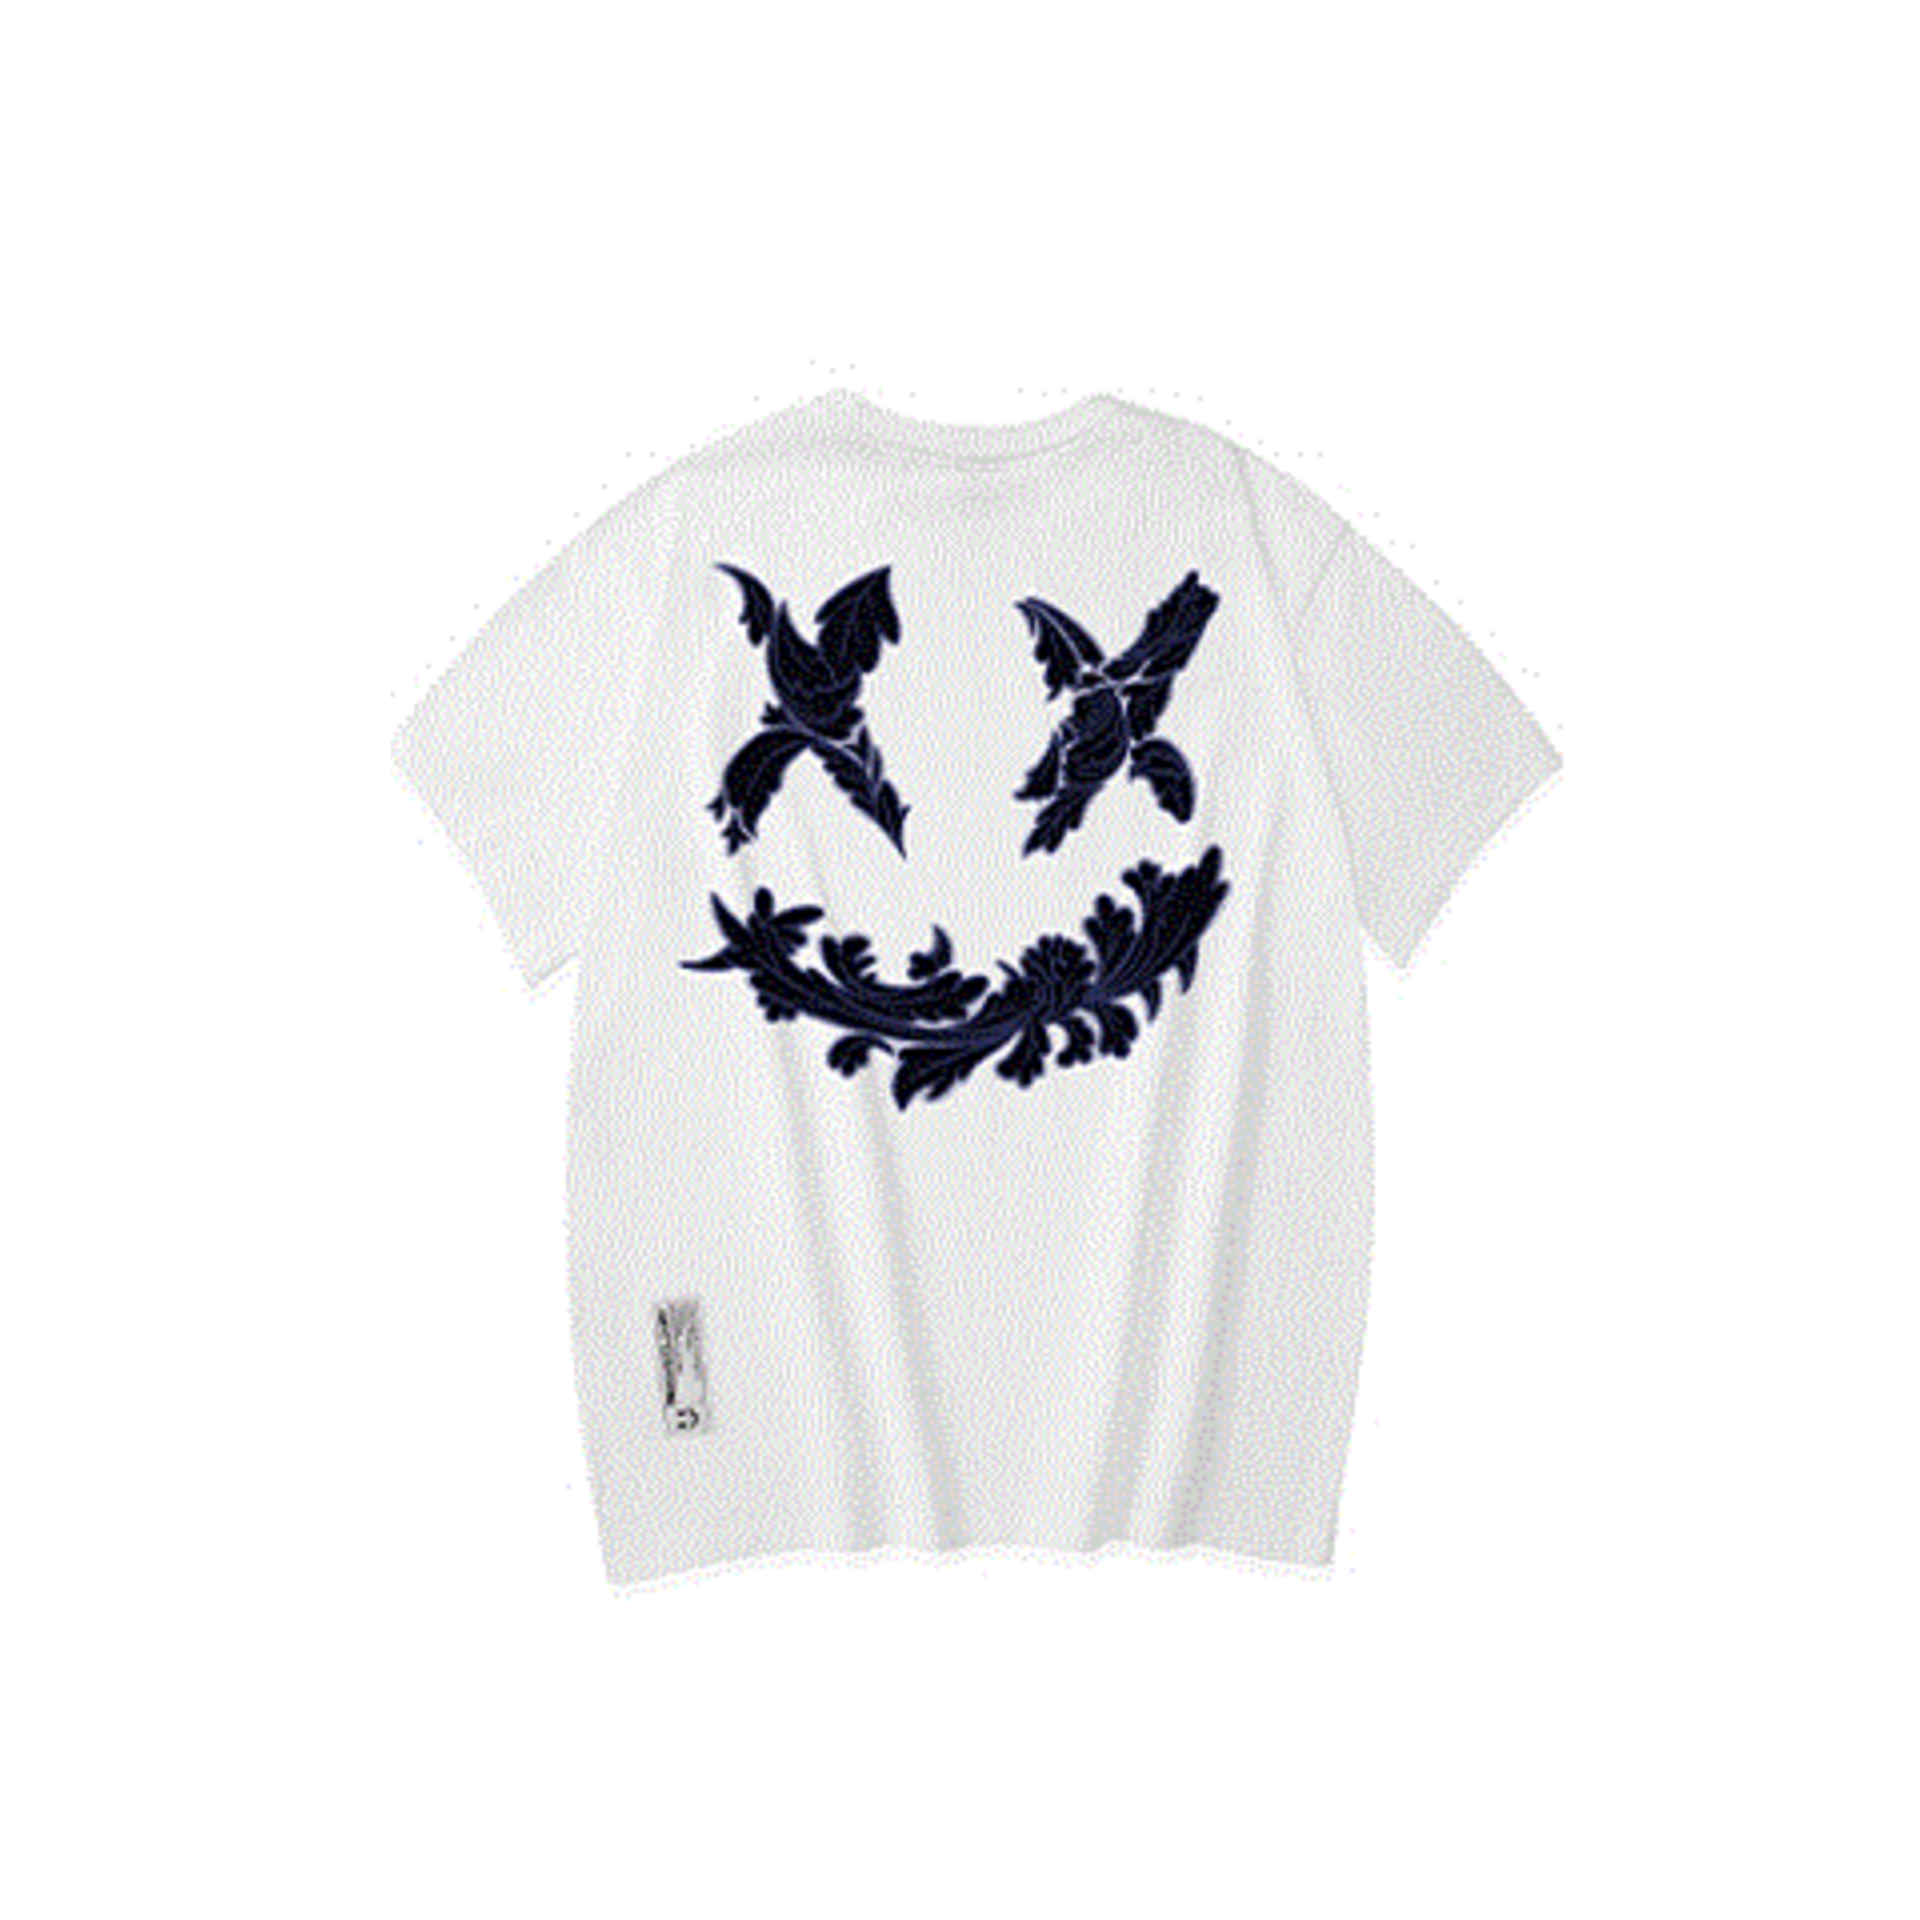 Rickyisclown [RIC] Dark Forest Tearing Smiley Printed Tee 'White'